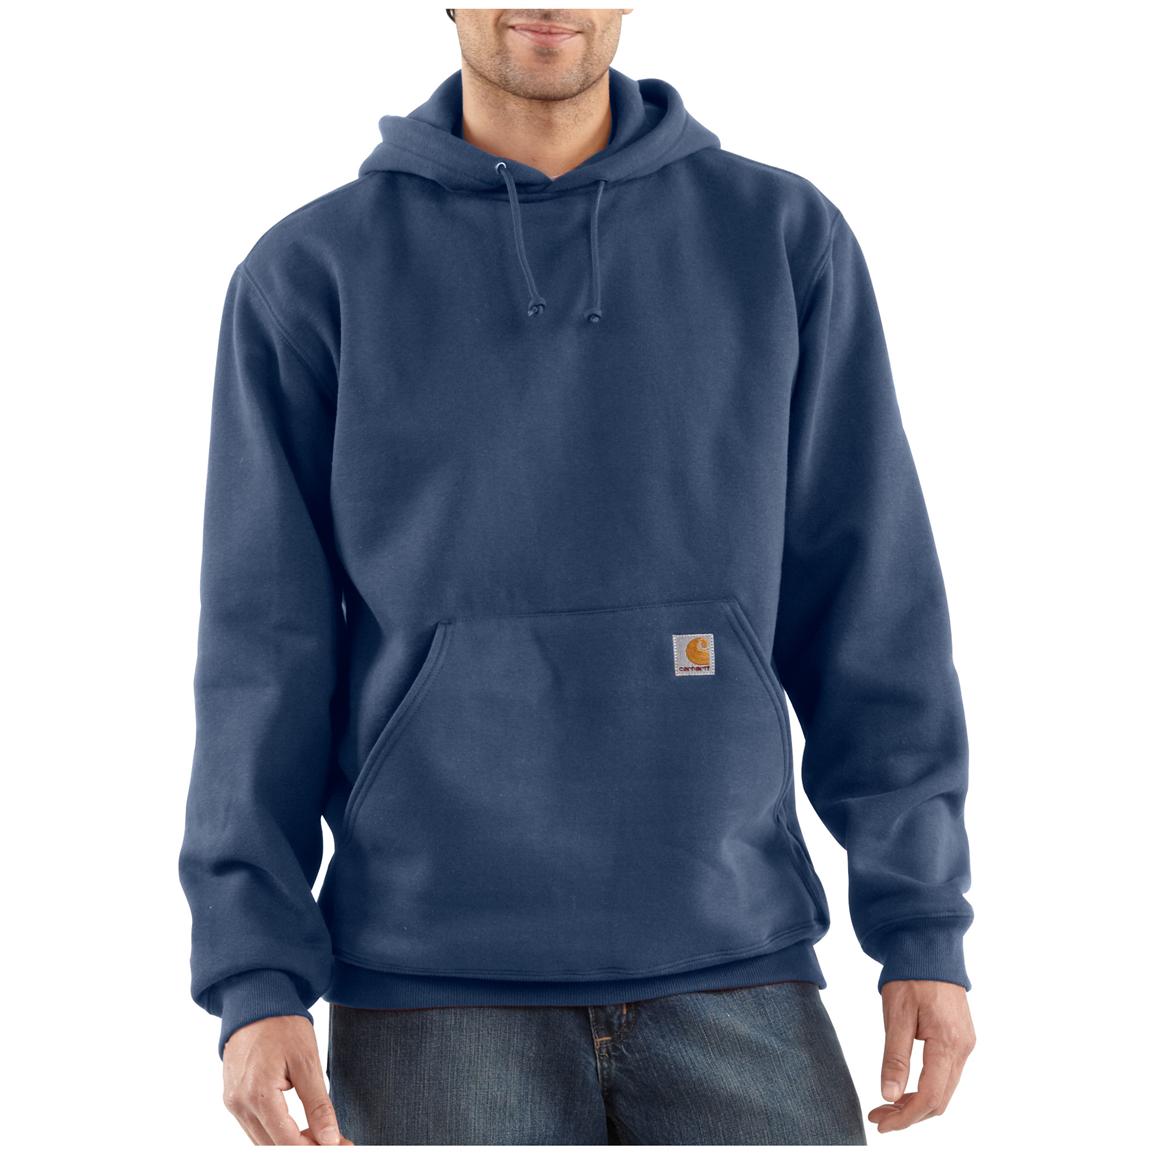 What we found out: Carhartt Heavyweight Hooded Pullover Sweatshirt